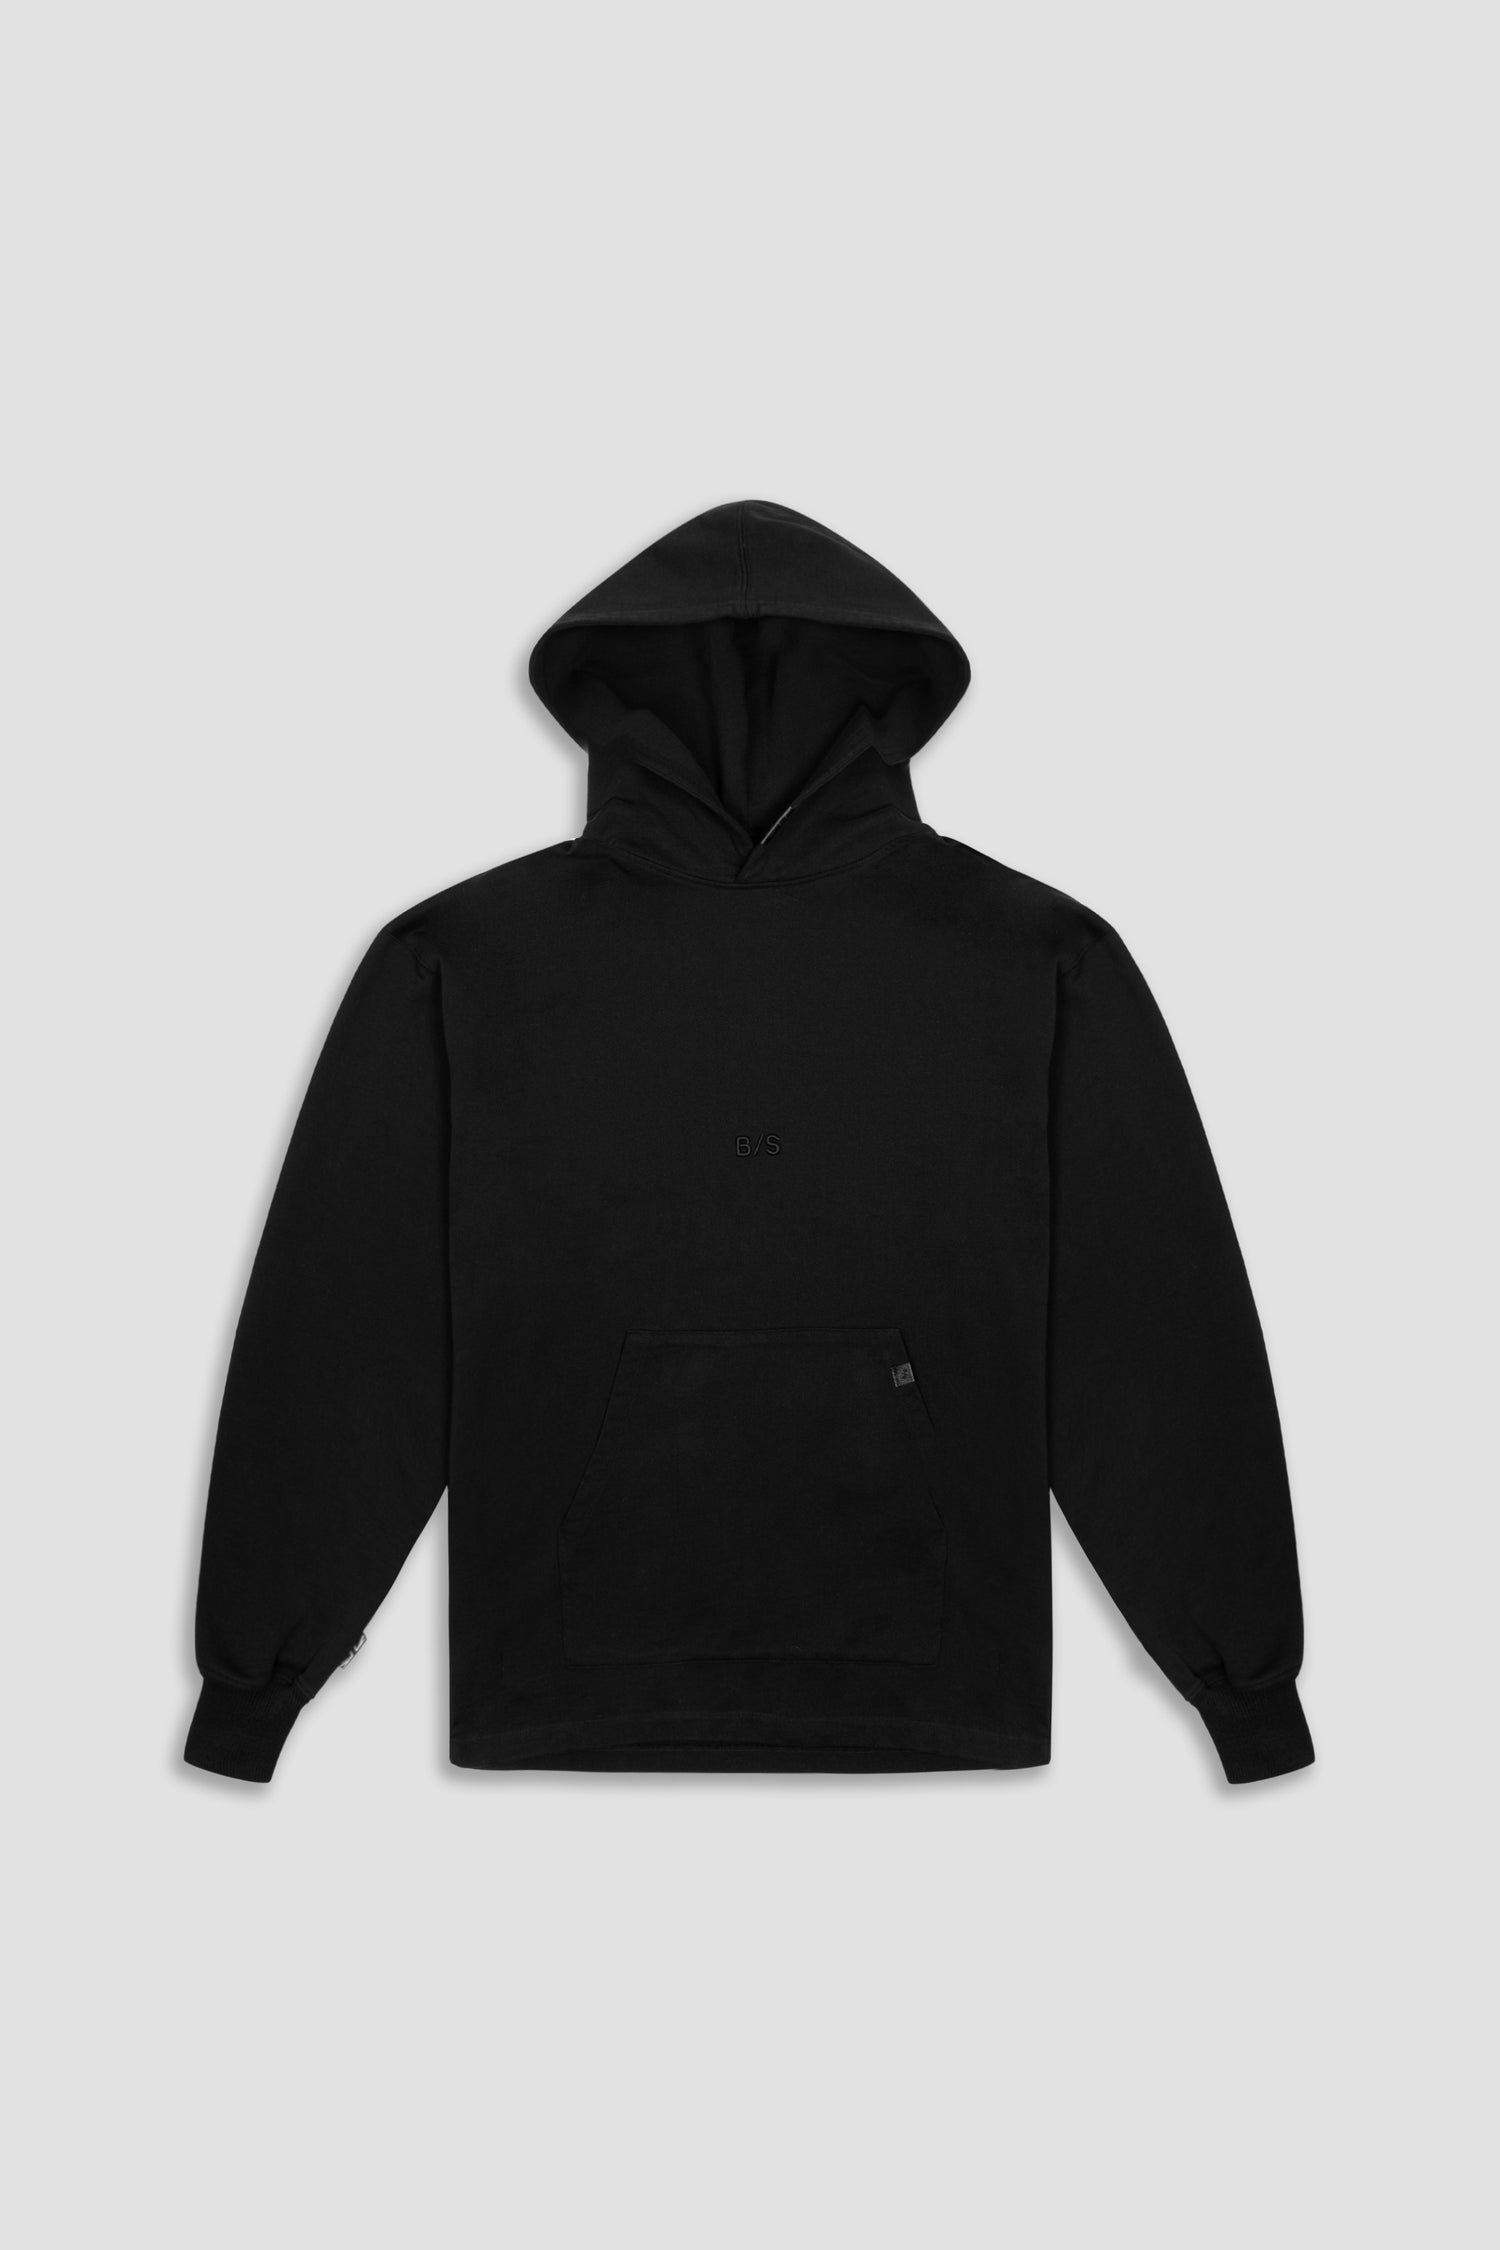 HOODIE MAN - By Price: Lowest to Highest